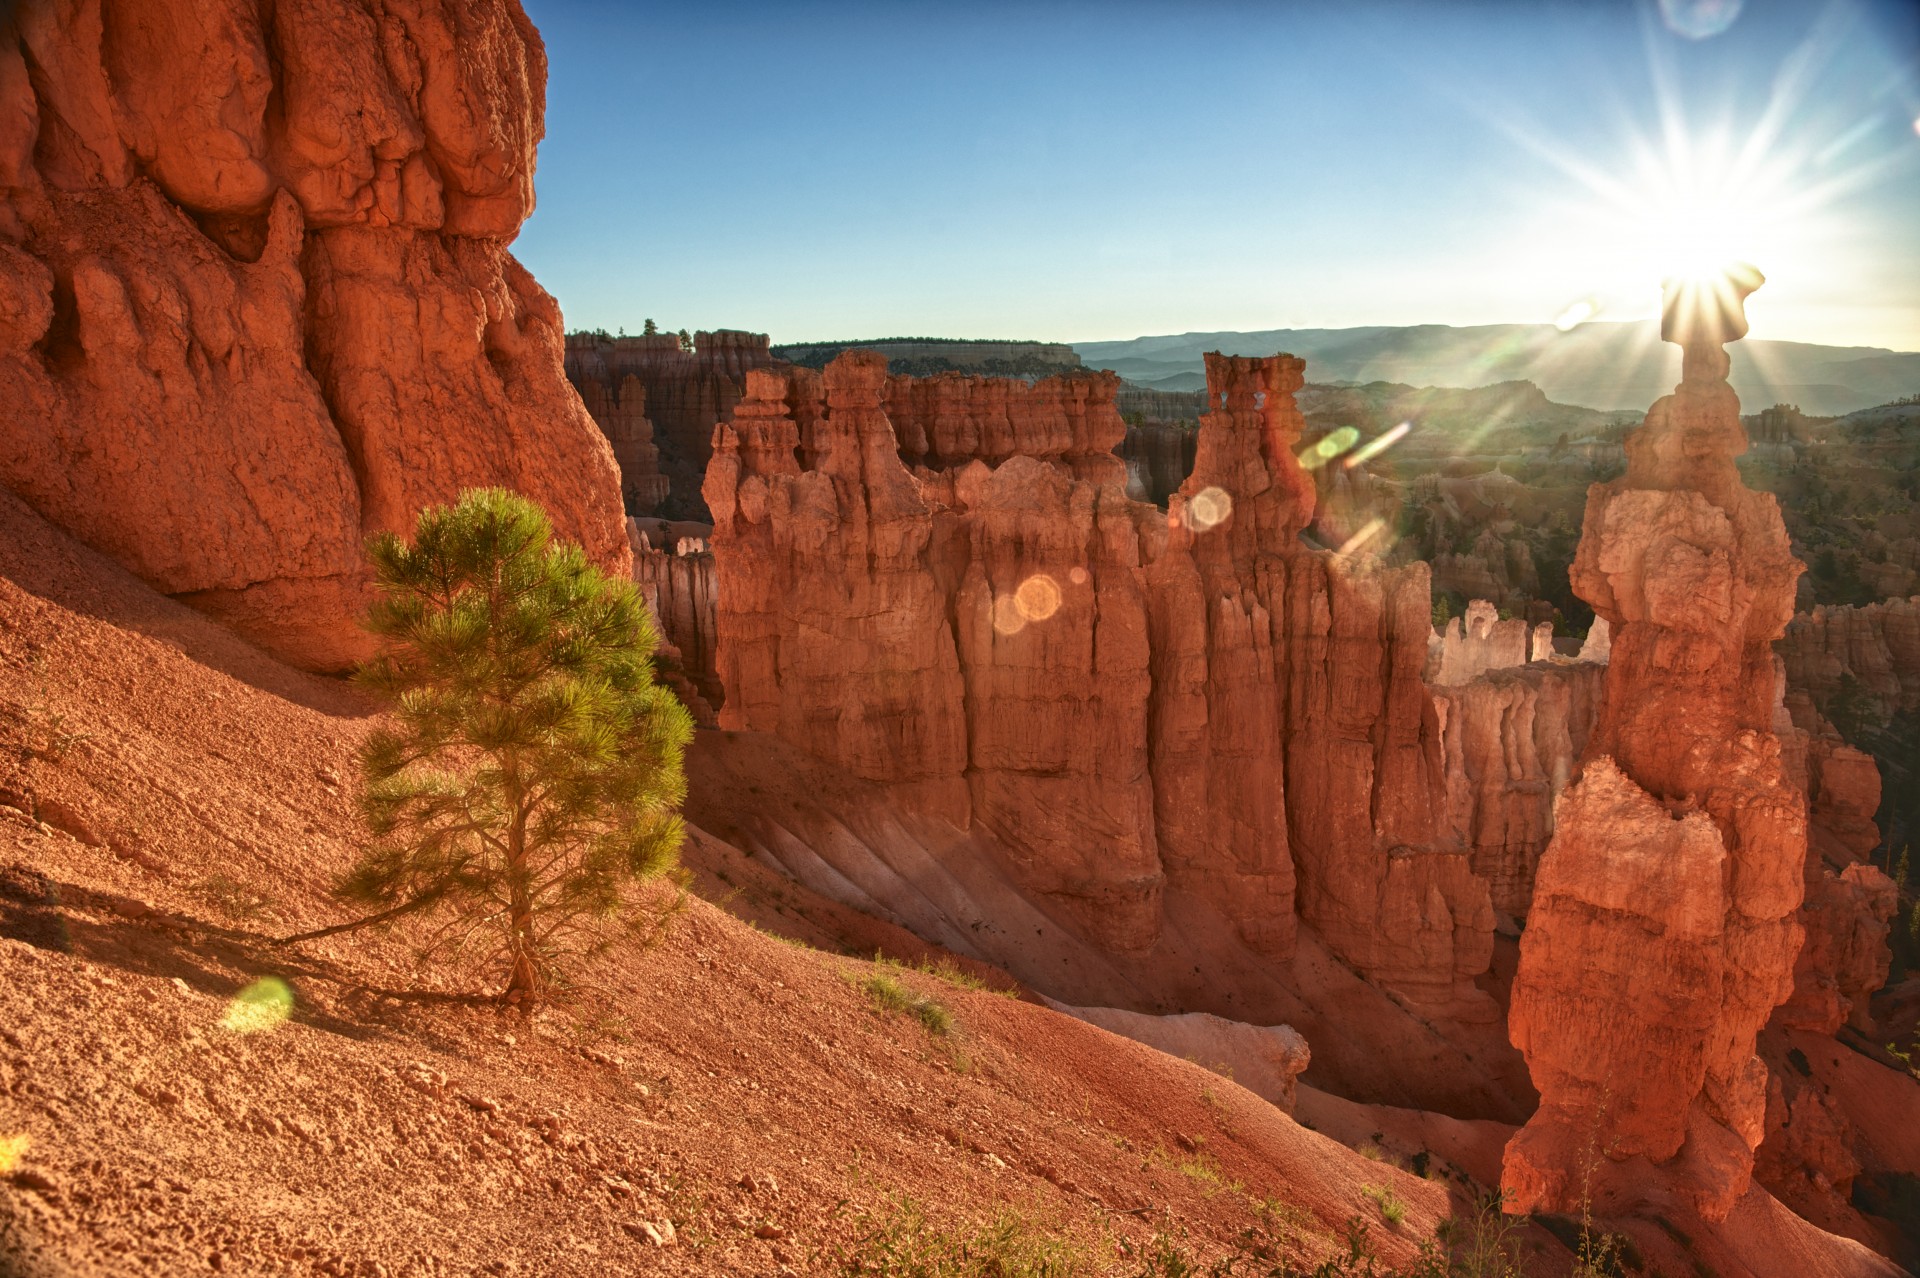 Tree lit in rays of the rising sun over the orange hoodoos of Bryce Canyon National Park in Utah.